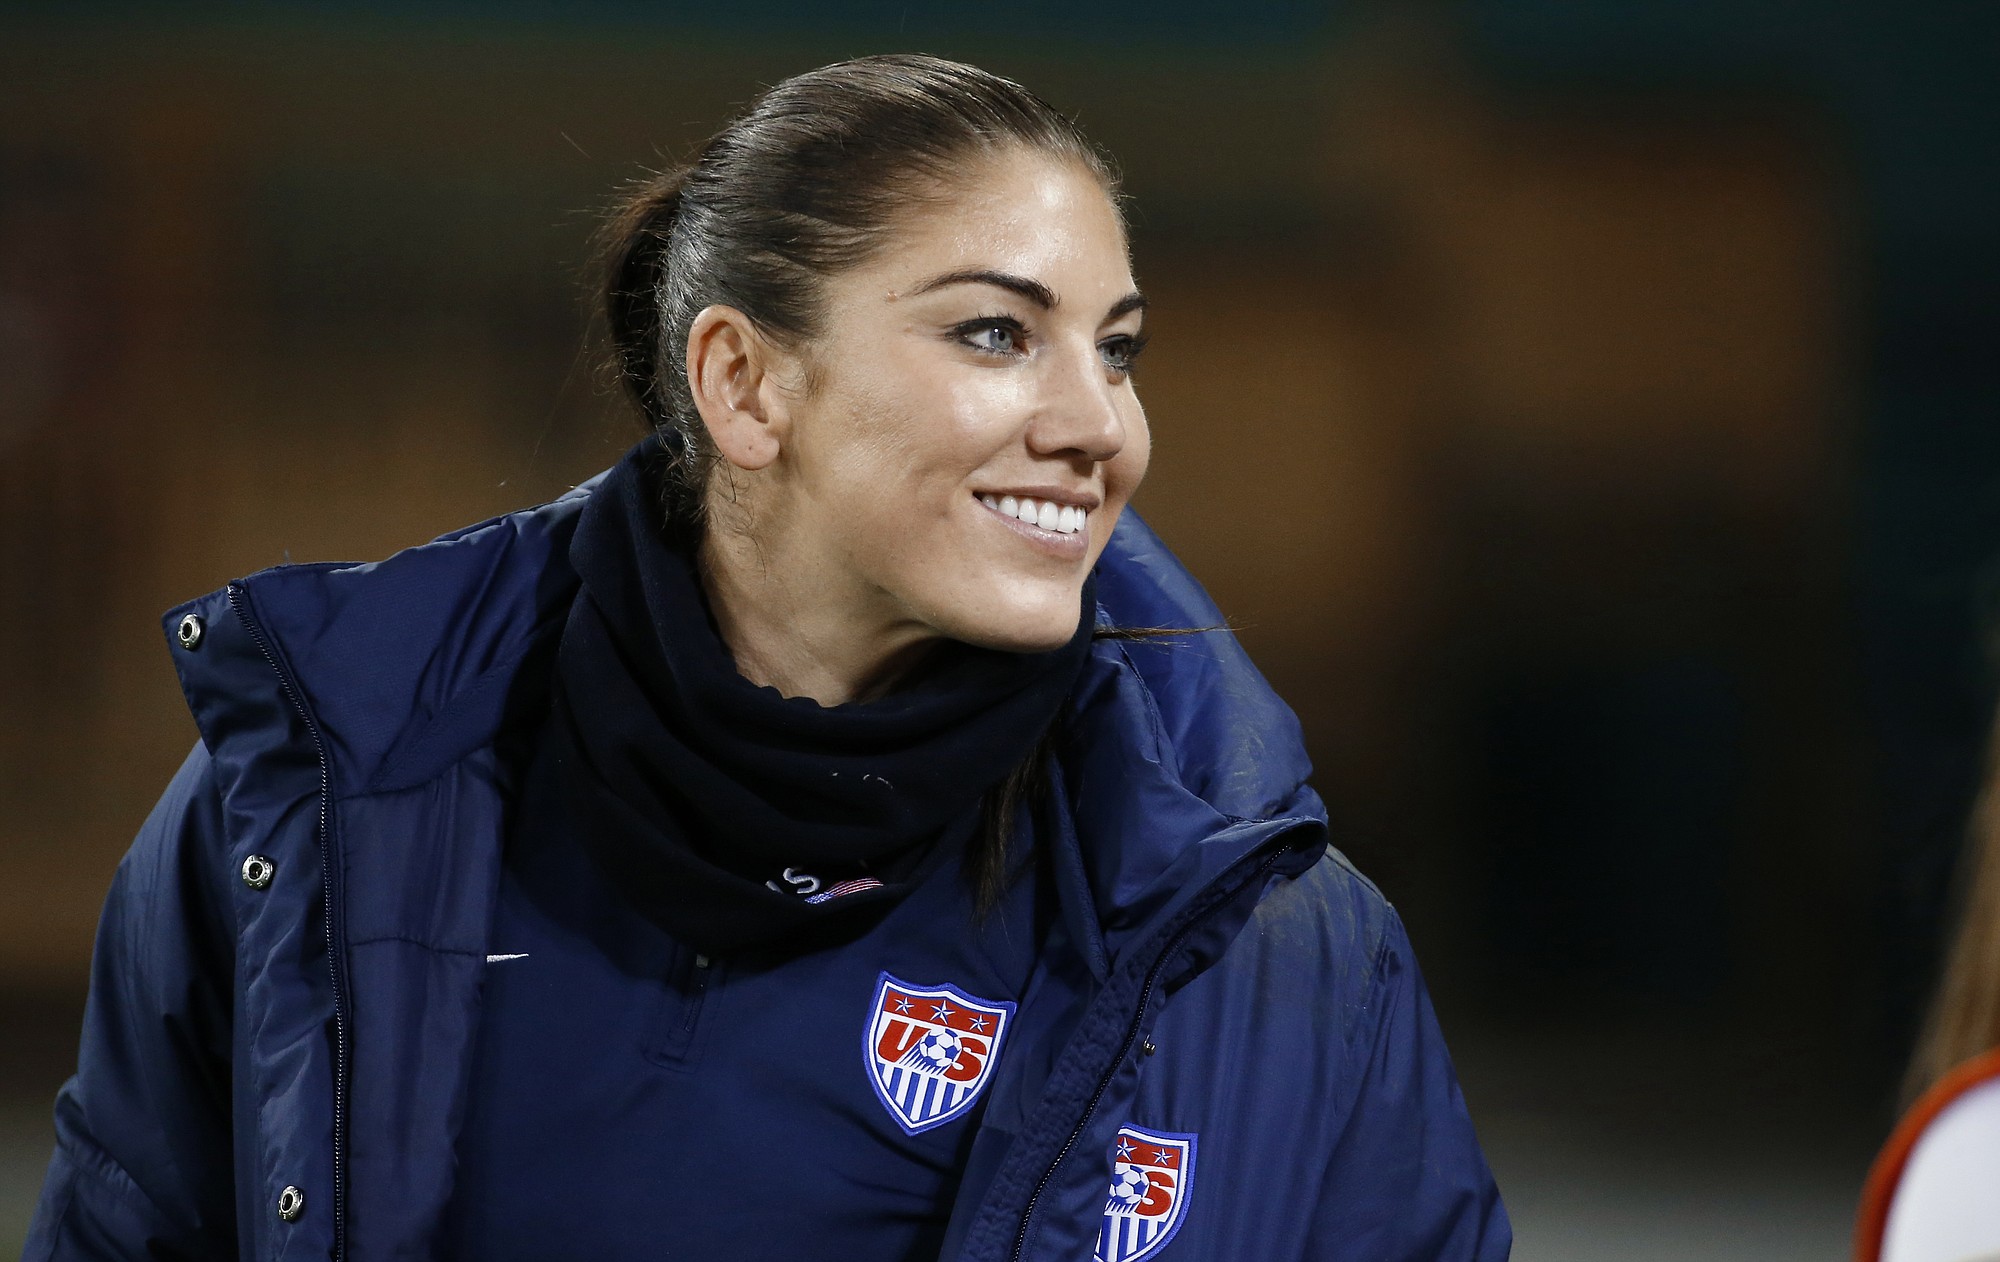 U.S. goalkeeper Hope Solo was reinstated by U.S. Soccer after a 30-day suspension and is on the travel roster for next month's Algarve Cup in Portugal.